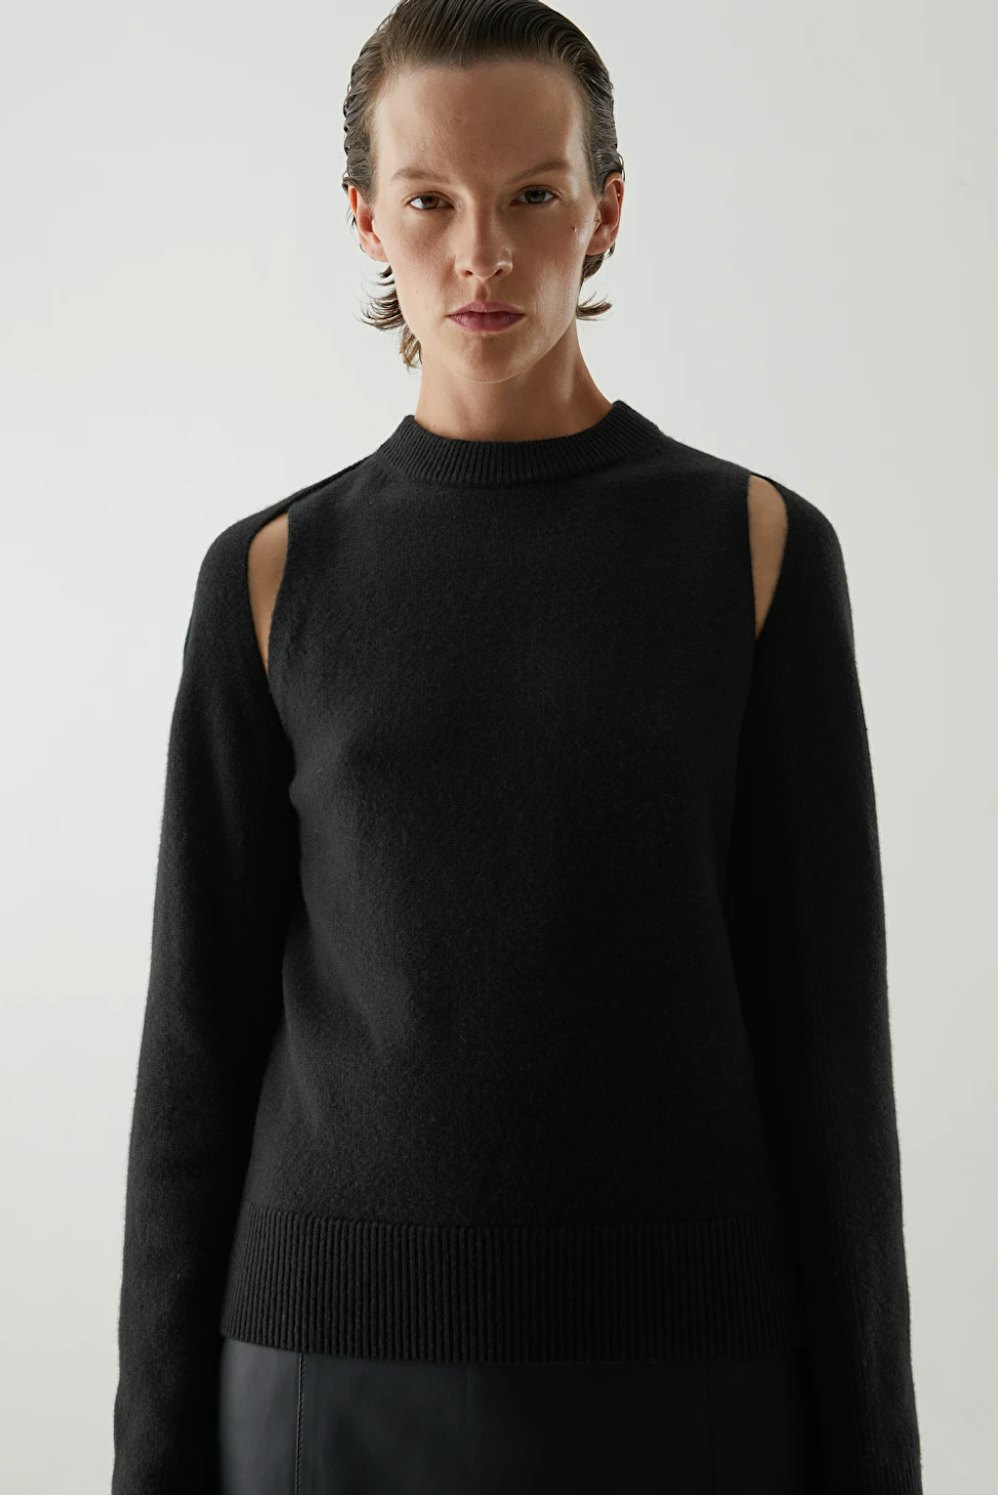 The Shrug Sweater Is Becoming A Transitional Knitwear Favorite